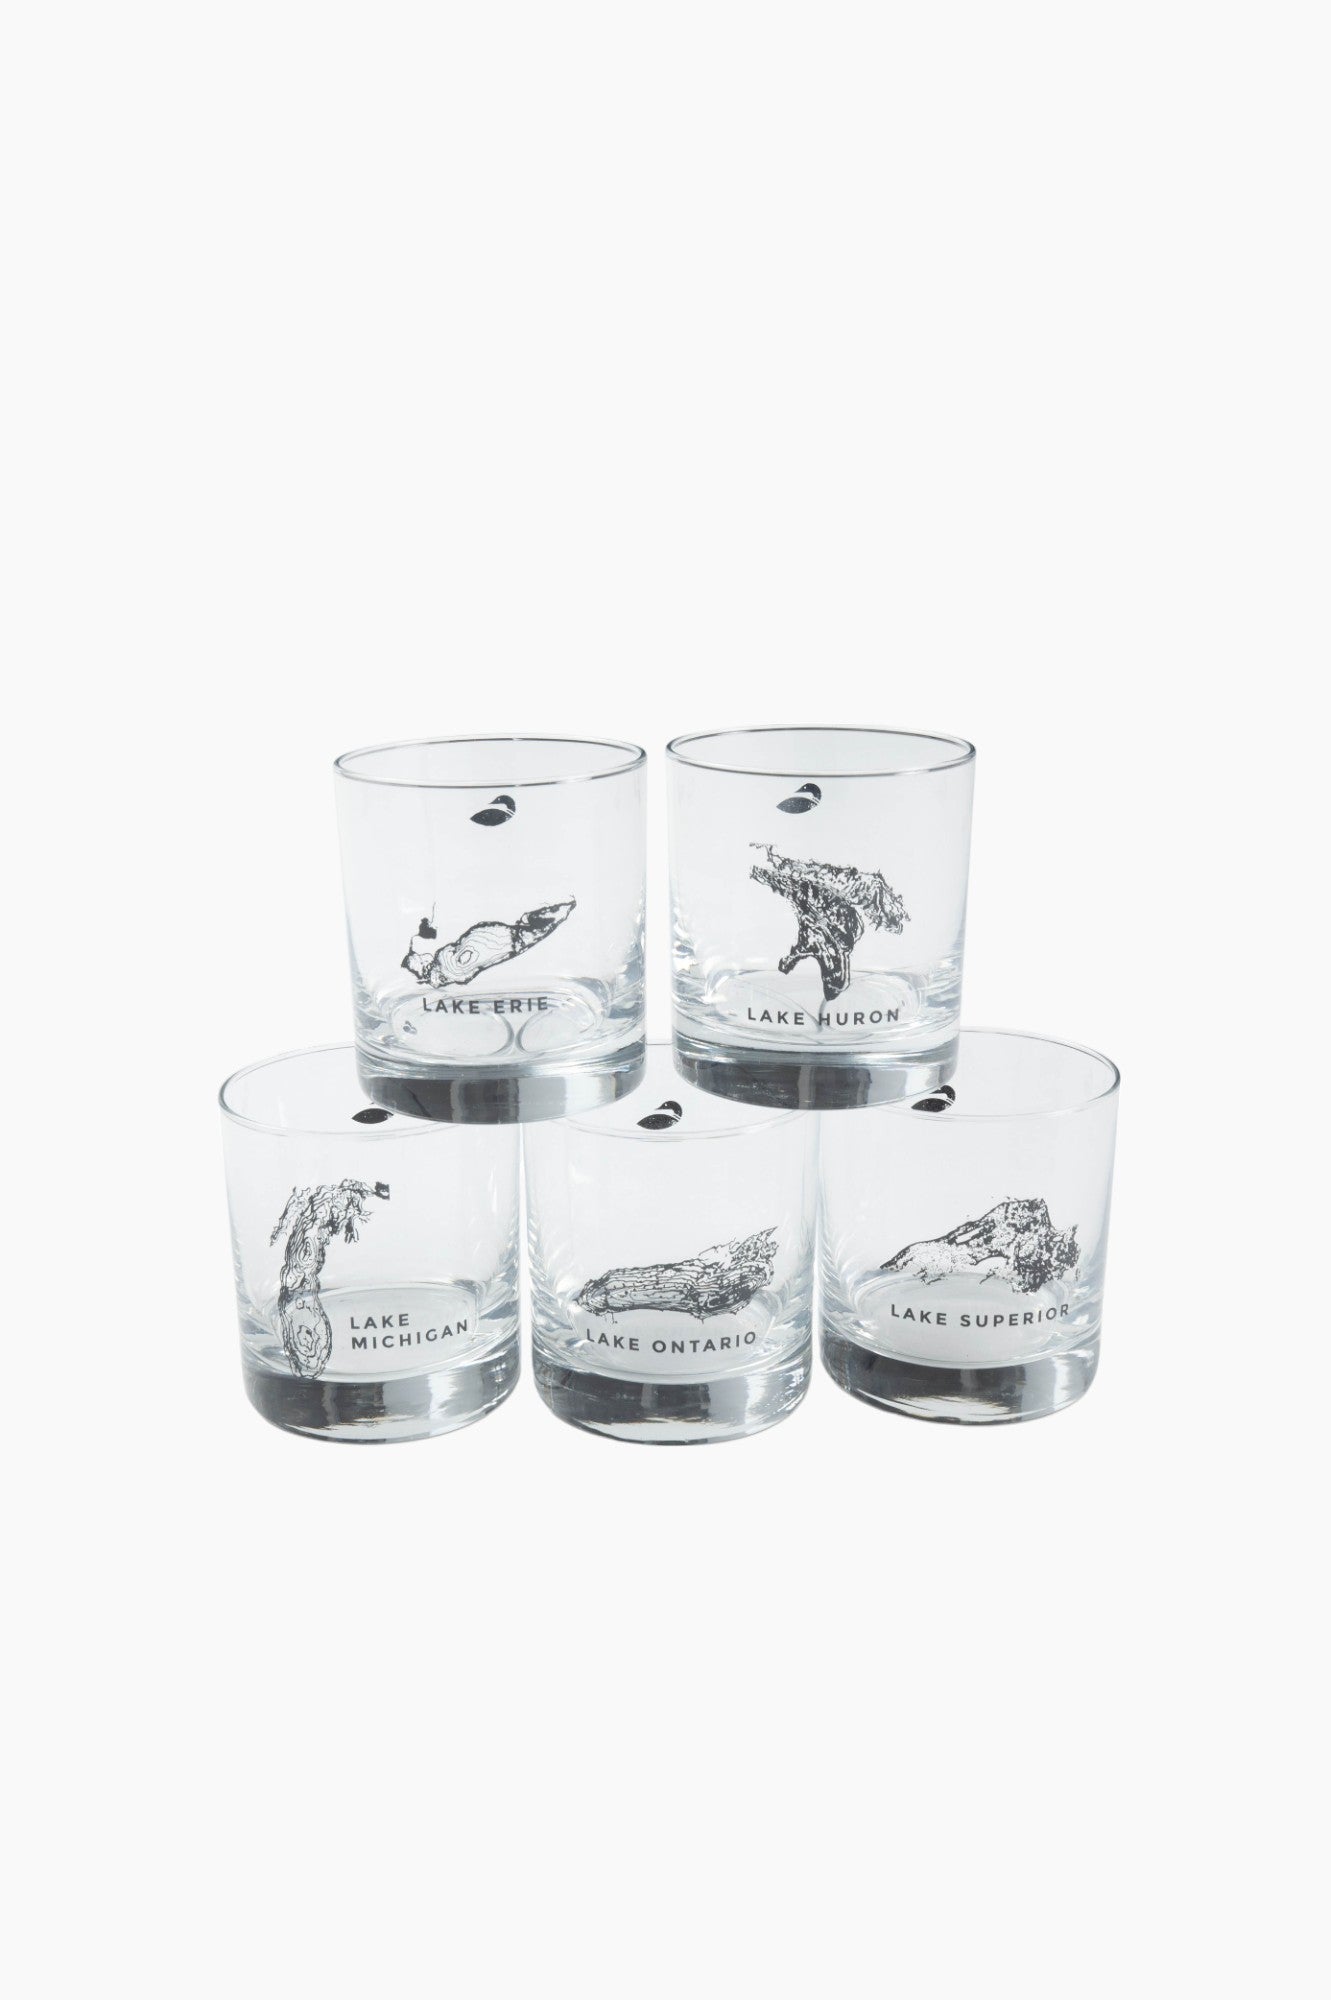 Clear drinking glasses stack on top of one another, each with a printed great lake on it.